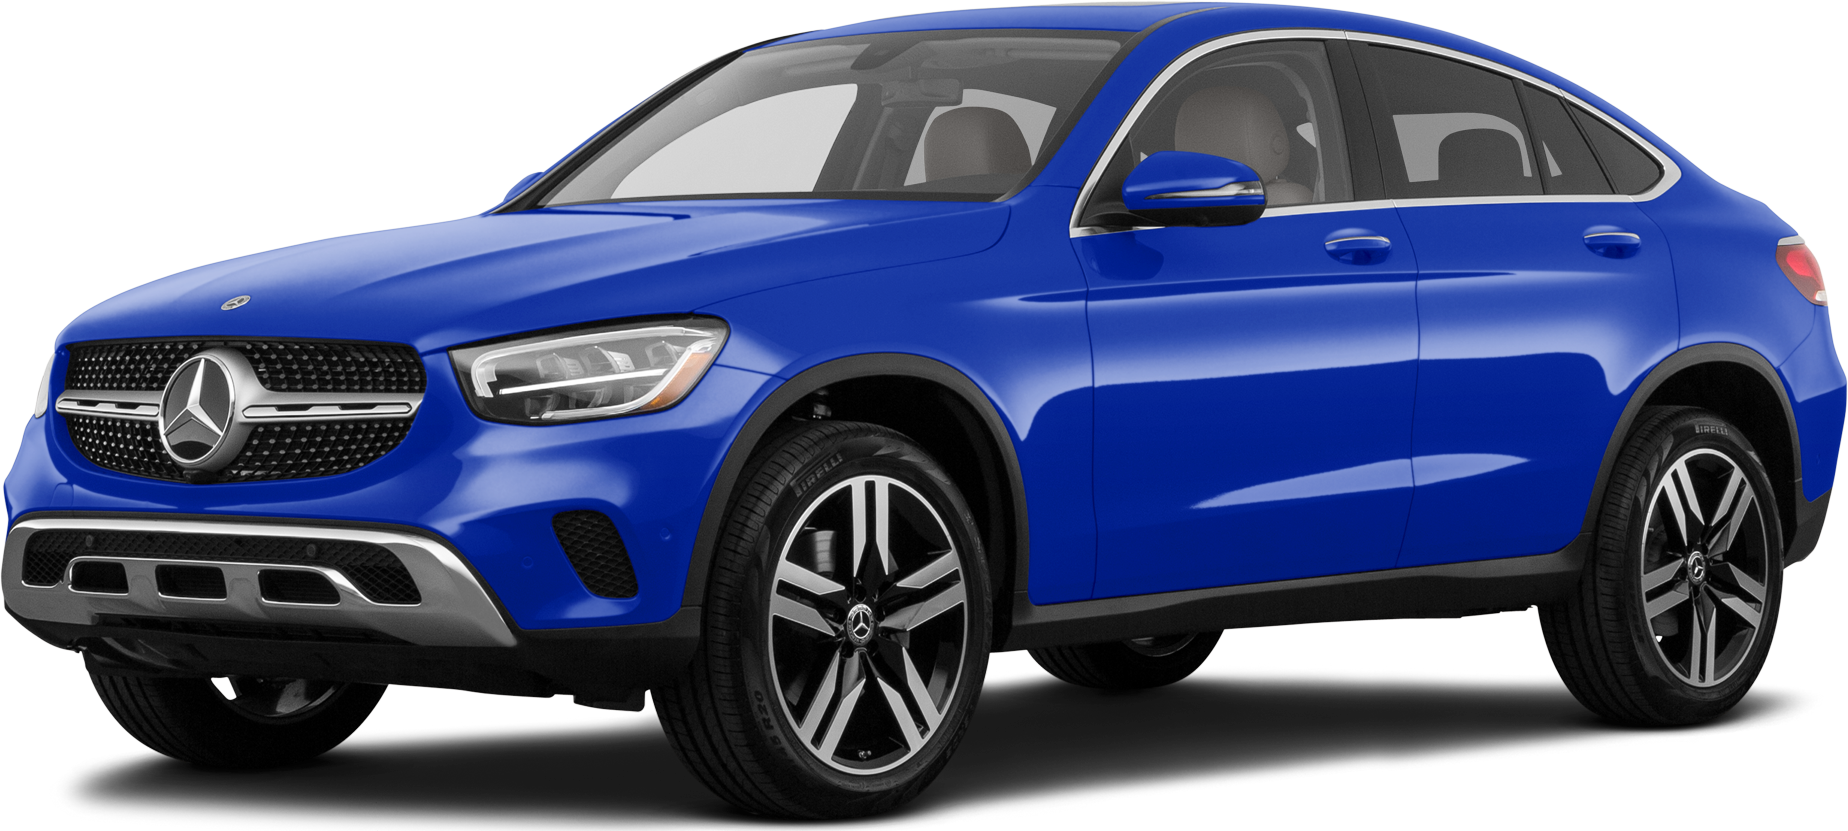 Mercedes-Benz GLC Coupe, Luxury Cars